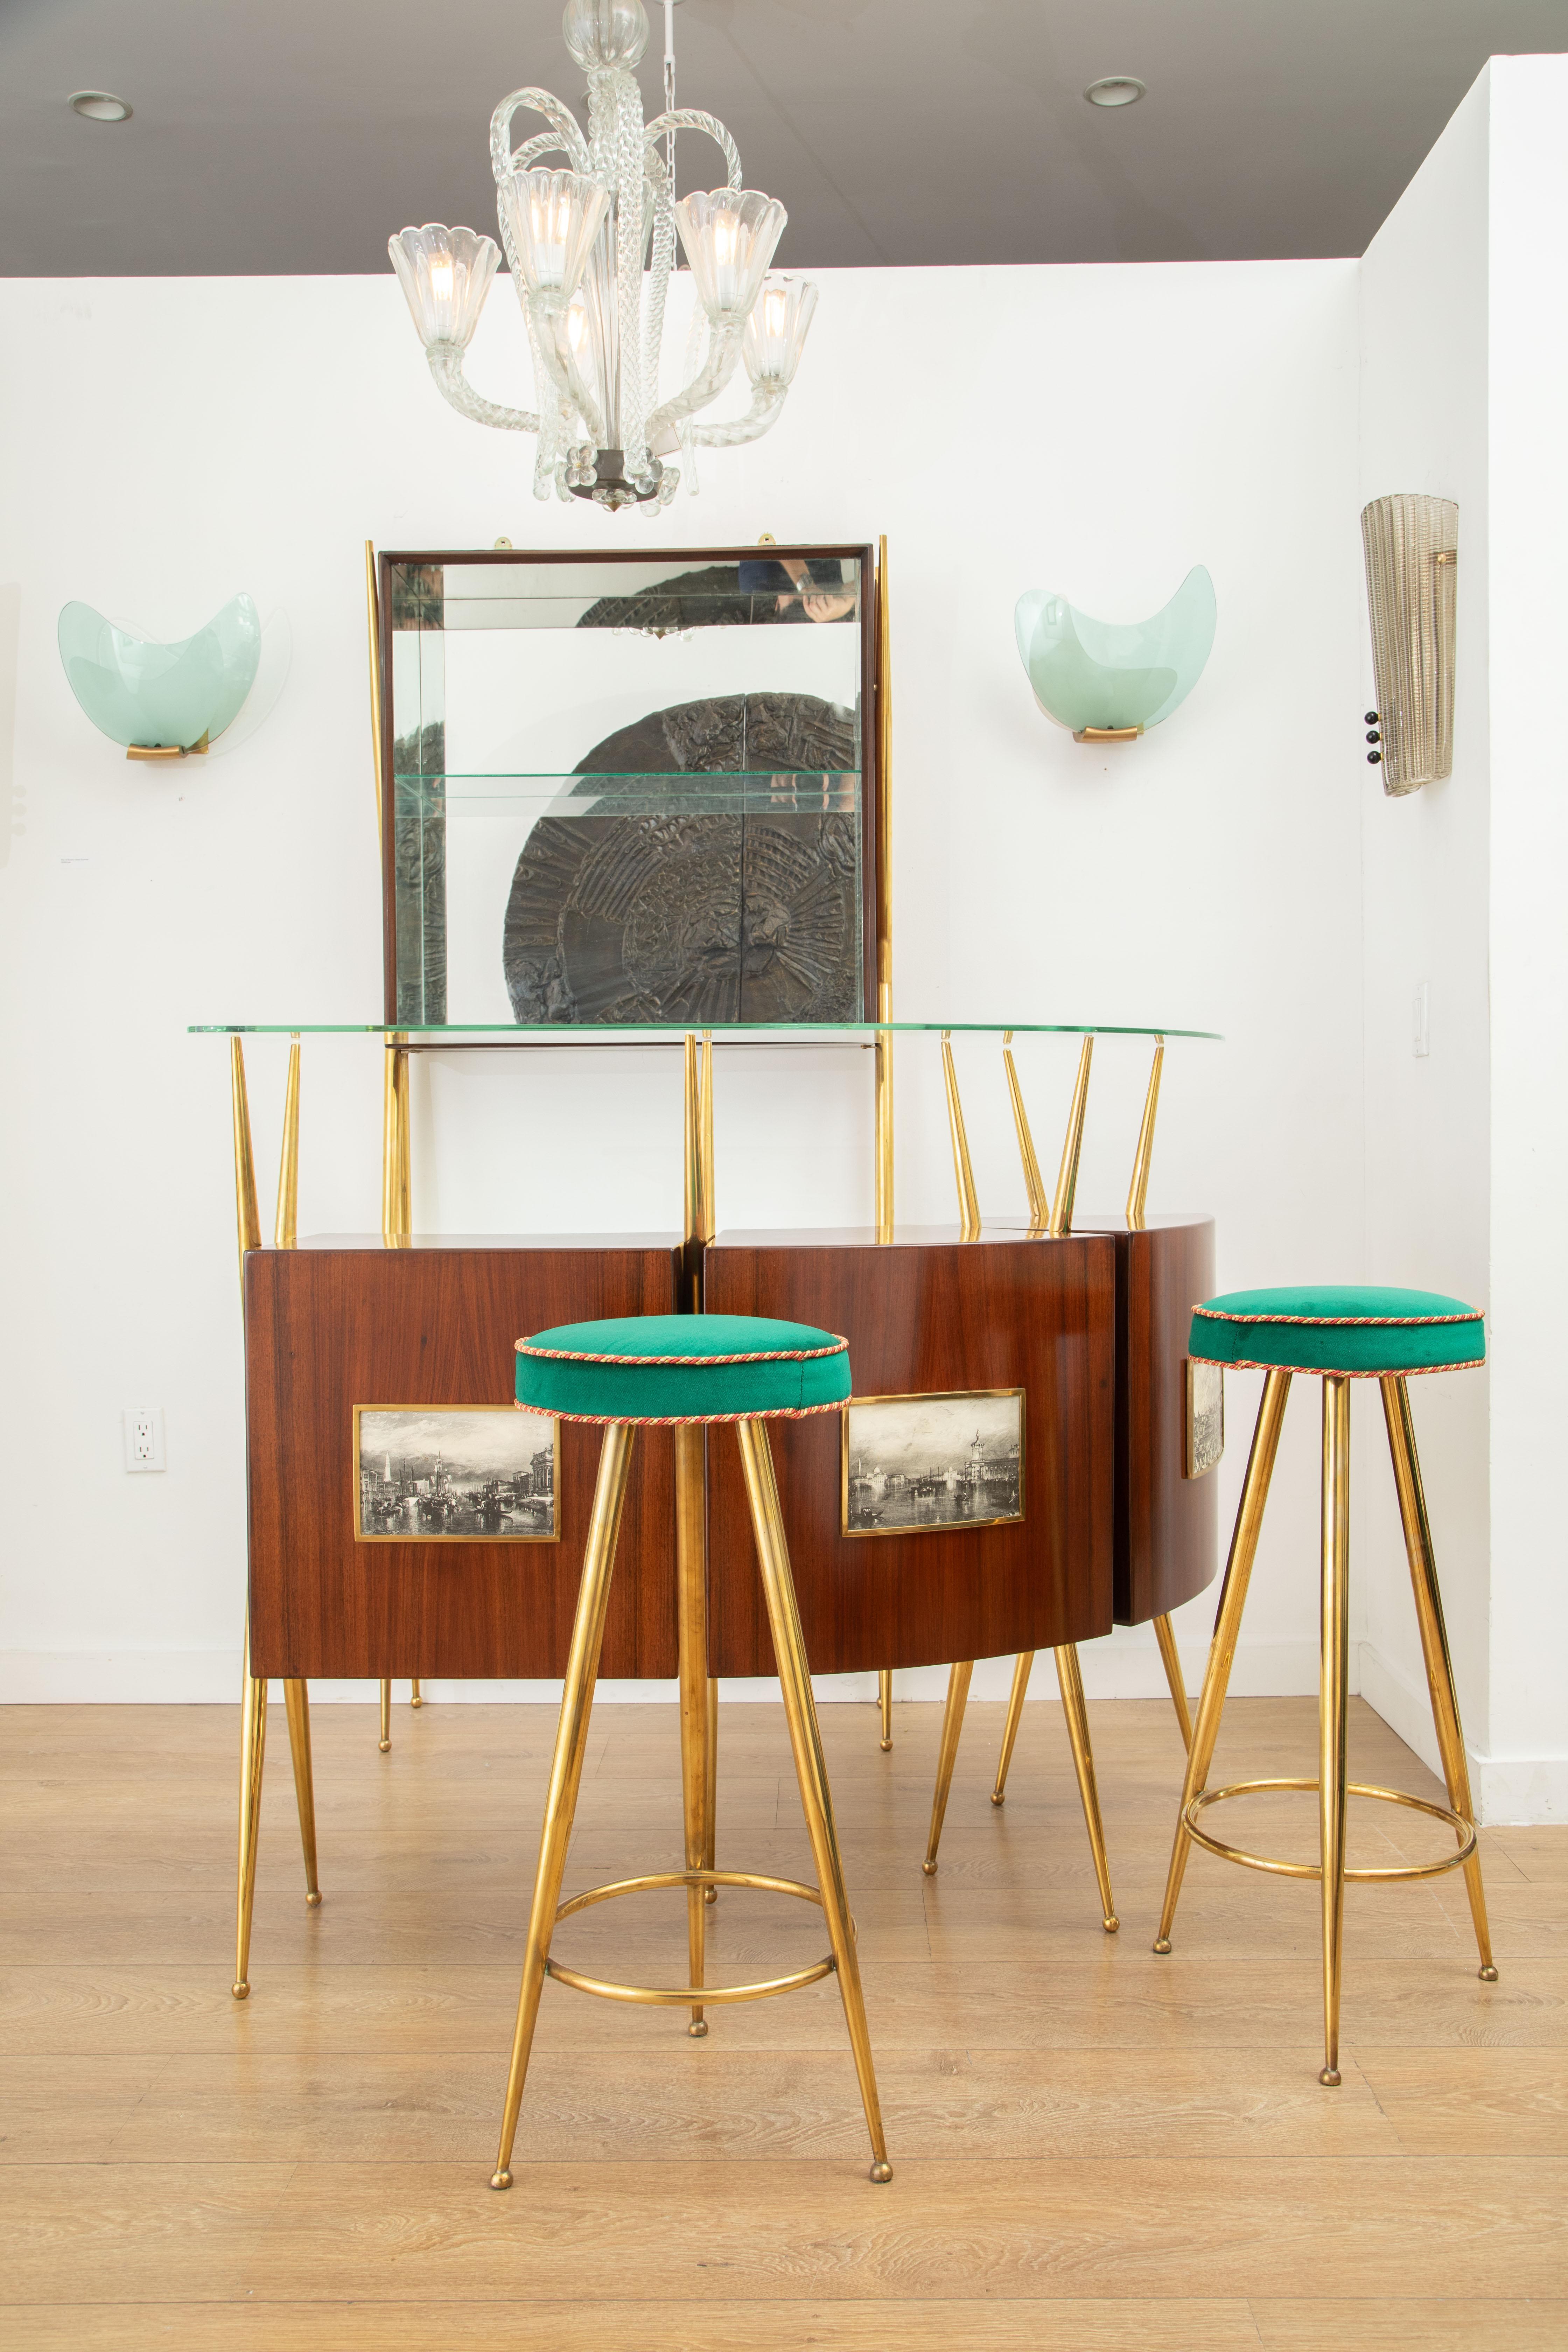 Dry bar suite, in the style of Gio Ponti, Italy 1950
An exceptional dark cherry wood veneer and brass 1950's Italian bar suite comprised of:
 A curved dry bar with glass top and lots of storage compartments
 Two brass stools newly upholstered with